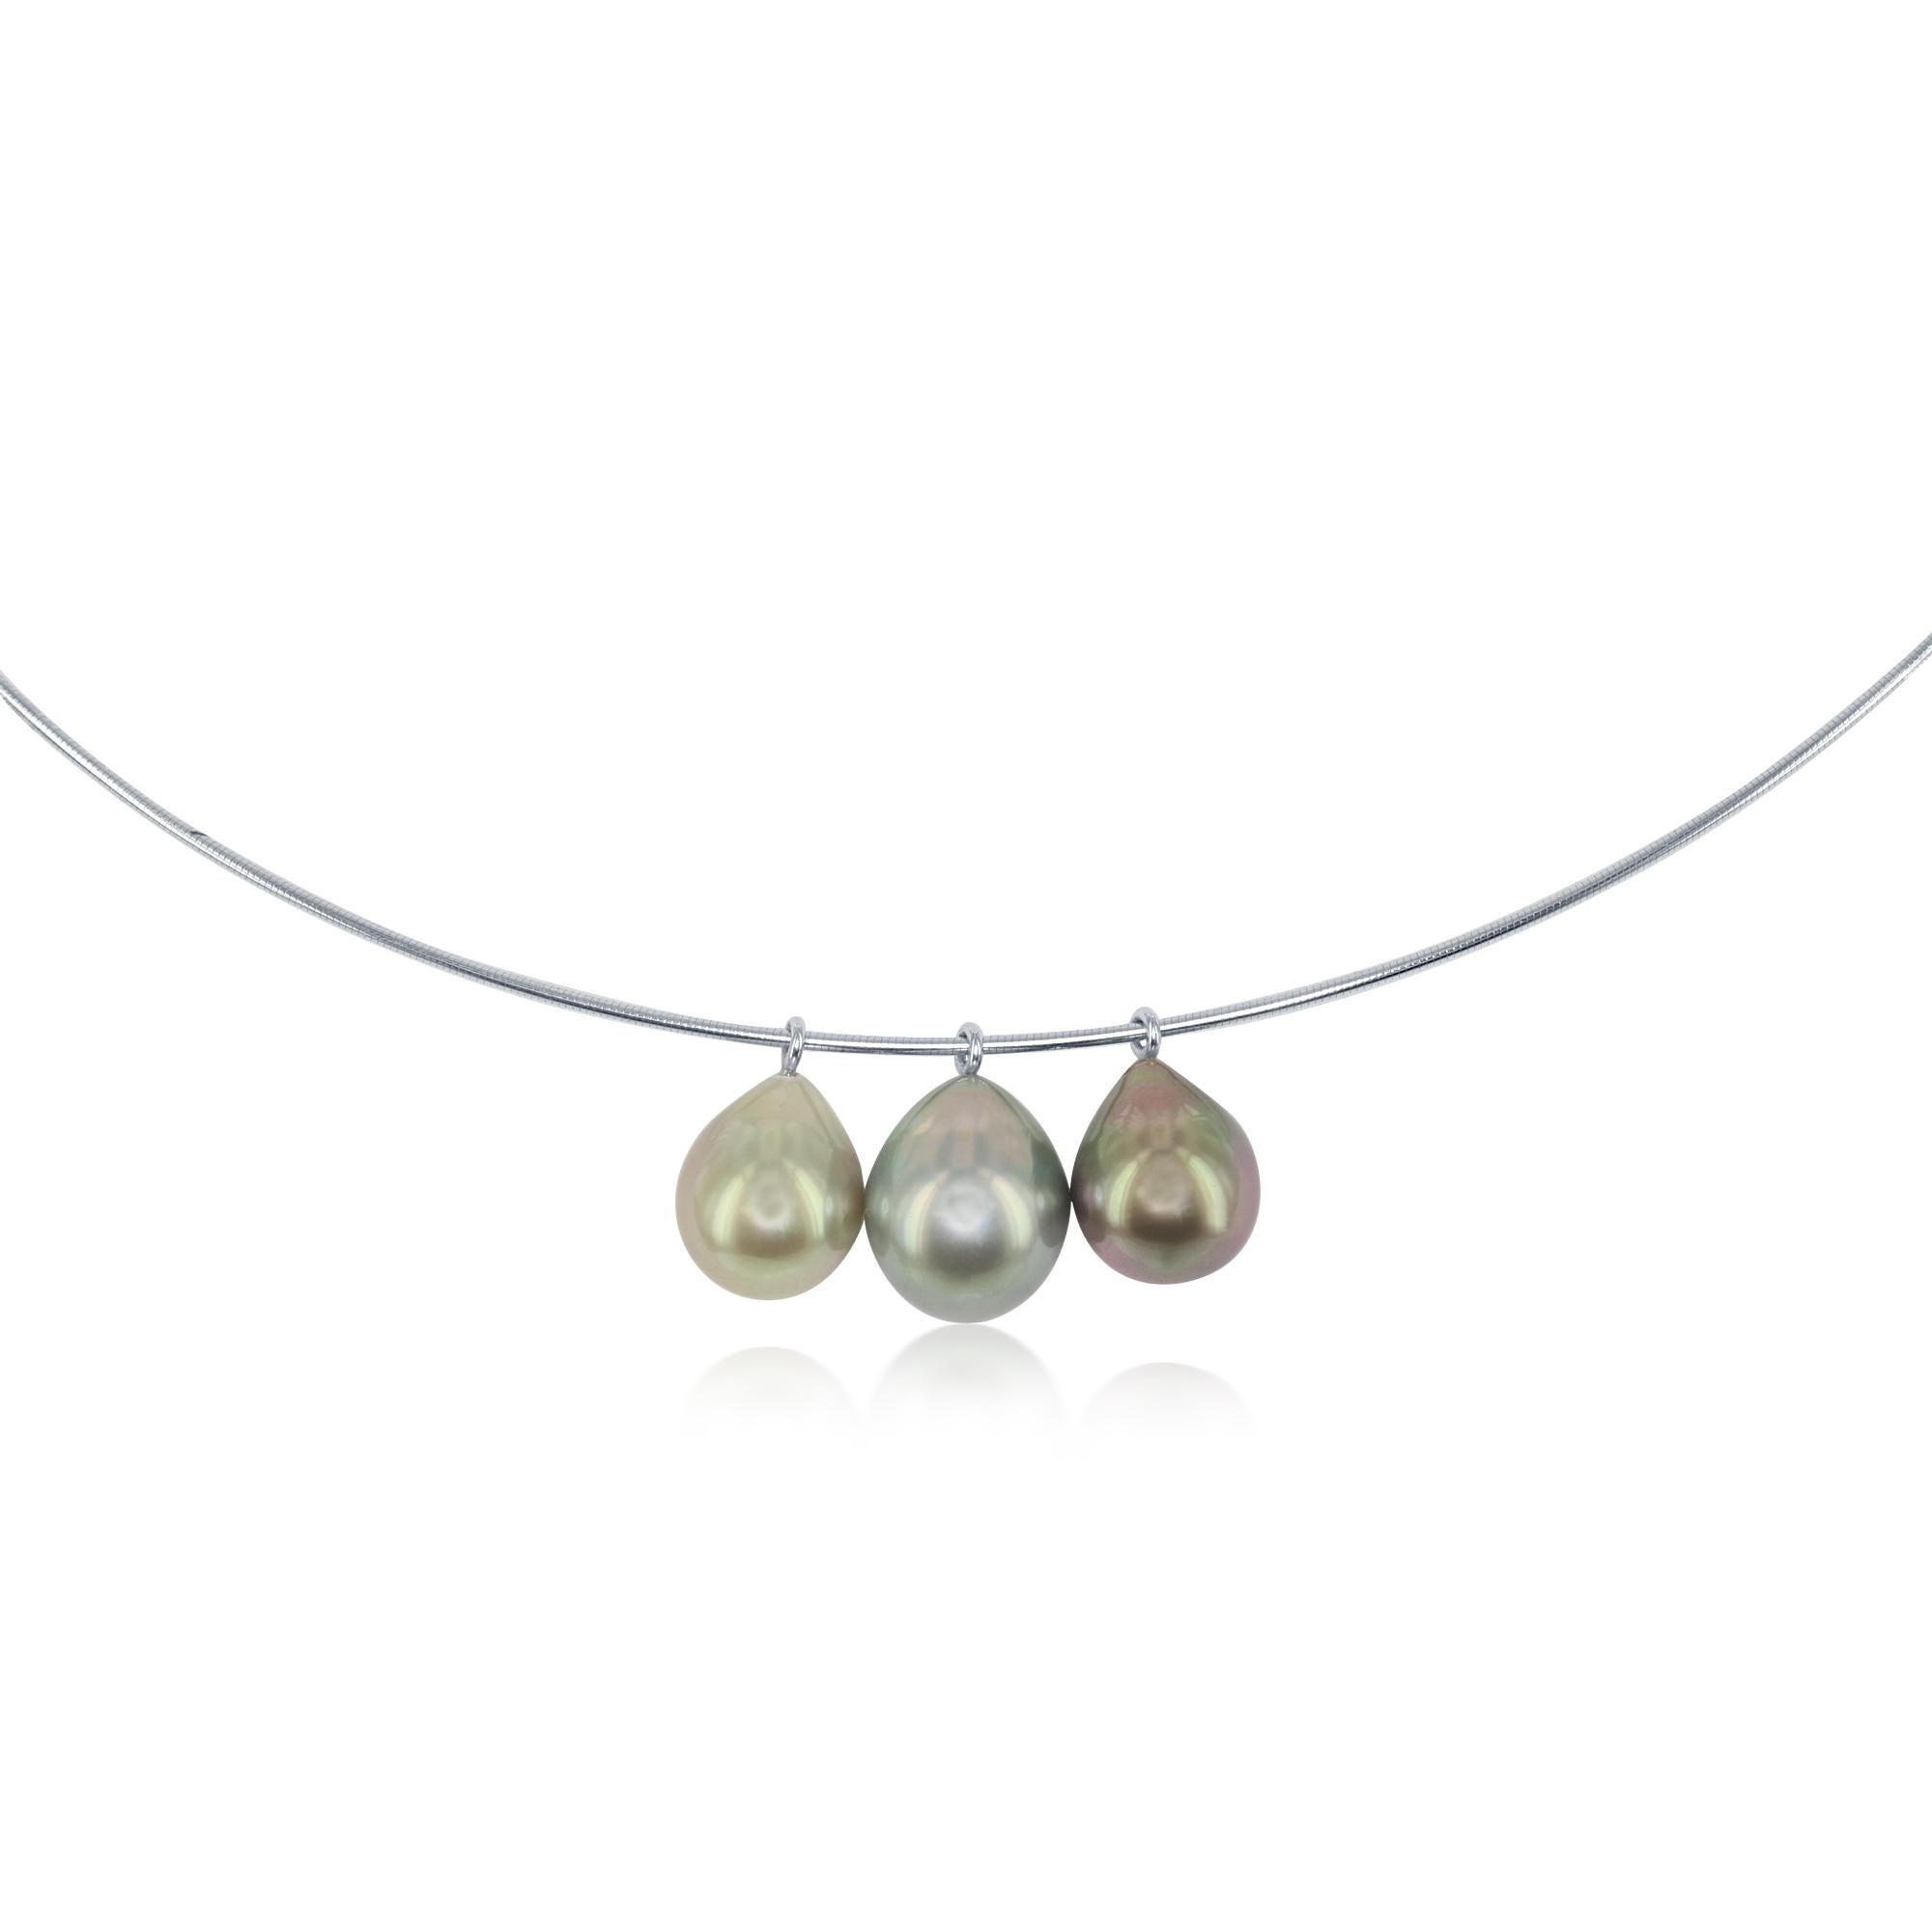 These three South Sea Tahitian cultured drop pearls are varying shades of pistachio green. The pearls are 9.5-10mm and dangle from an 18 karat white gold wire. This gorgeous necklace offers the perfect pop of color and touch of elegance to any